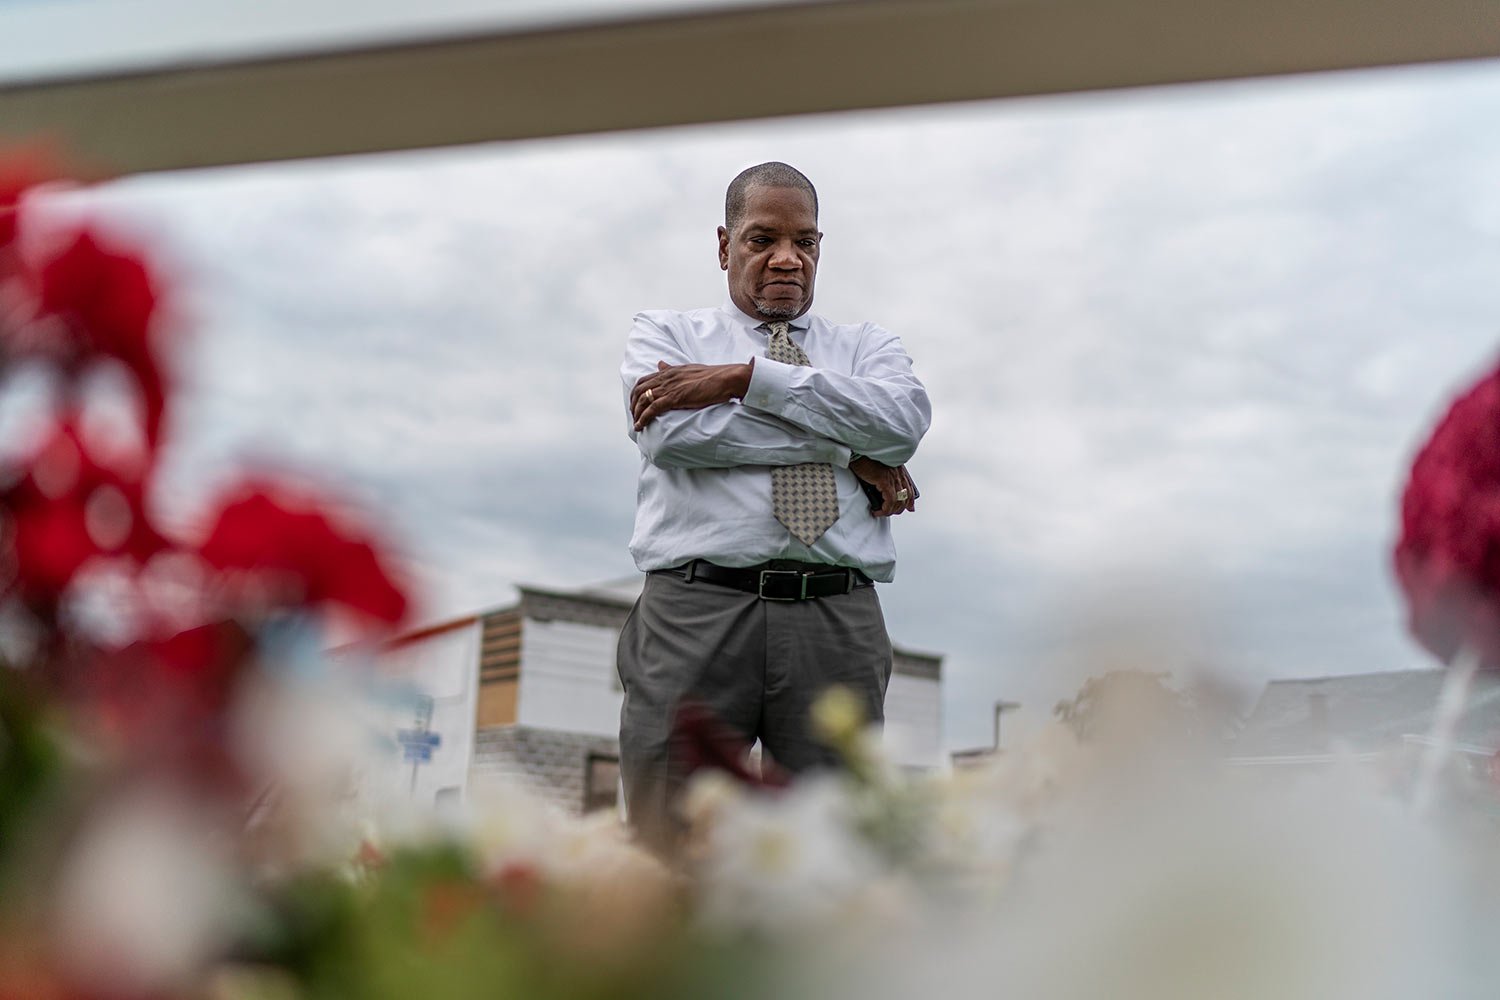  Rev. Jimmie Hardaway Jr. stands at a memorial to the 10 people killed when a shooter targeted Black shoppers at a Tops supermarket, Sunday, Aug. 20, 2023, in Buffalo, N.Y. (AP Photo/David Goldman)  